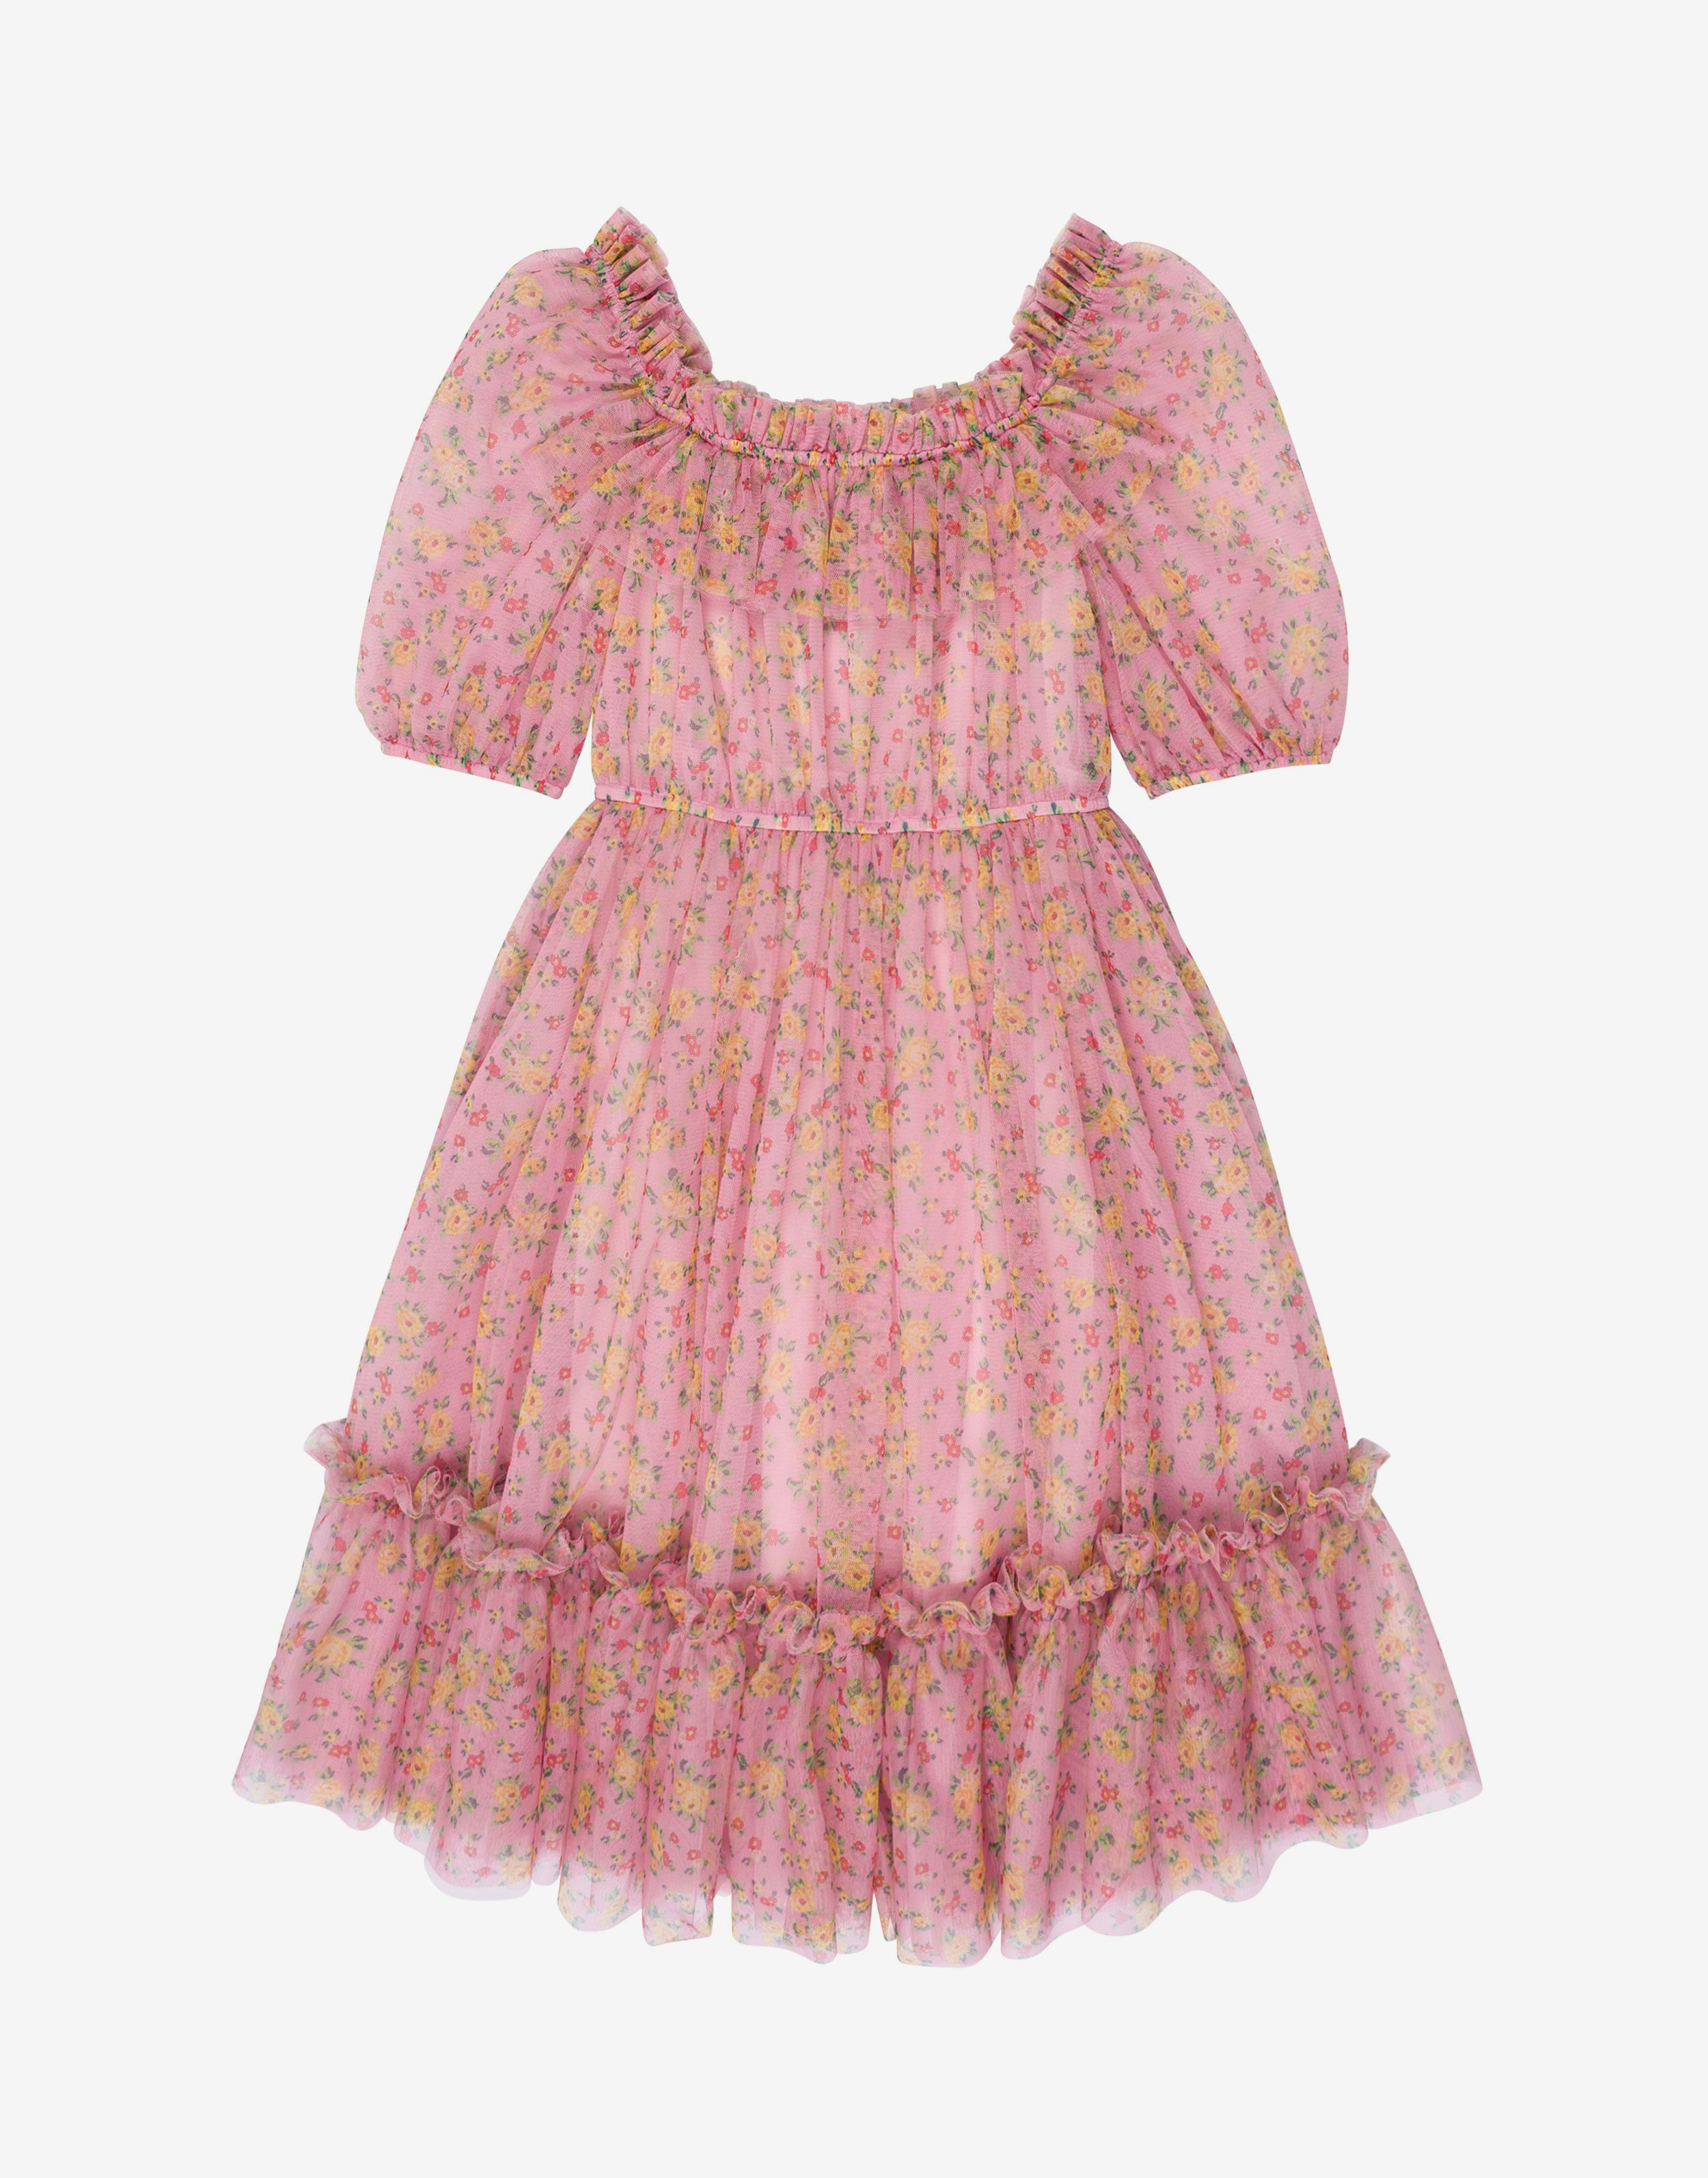 Kids' tulle dress with floral print